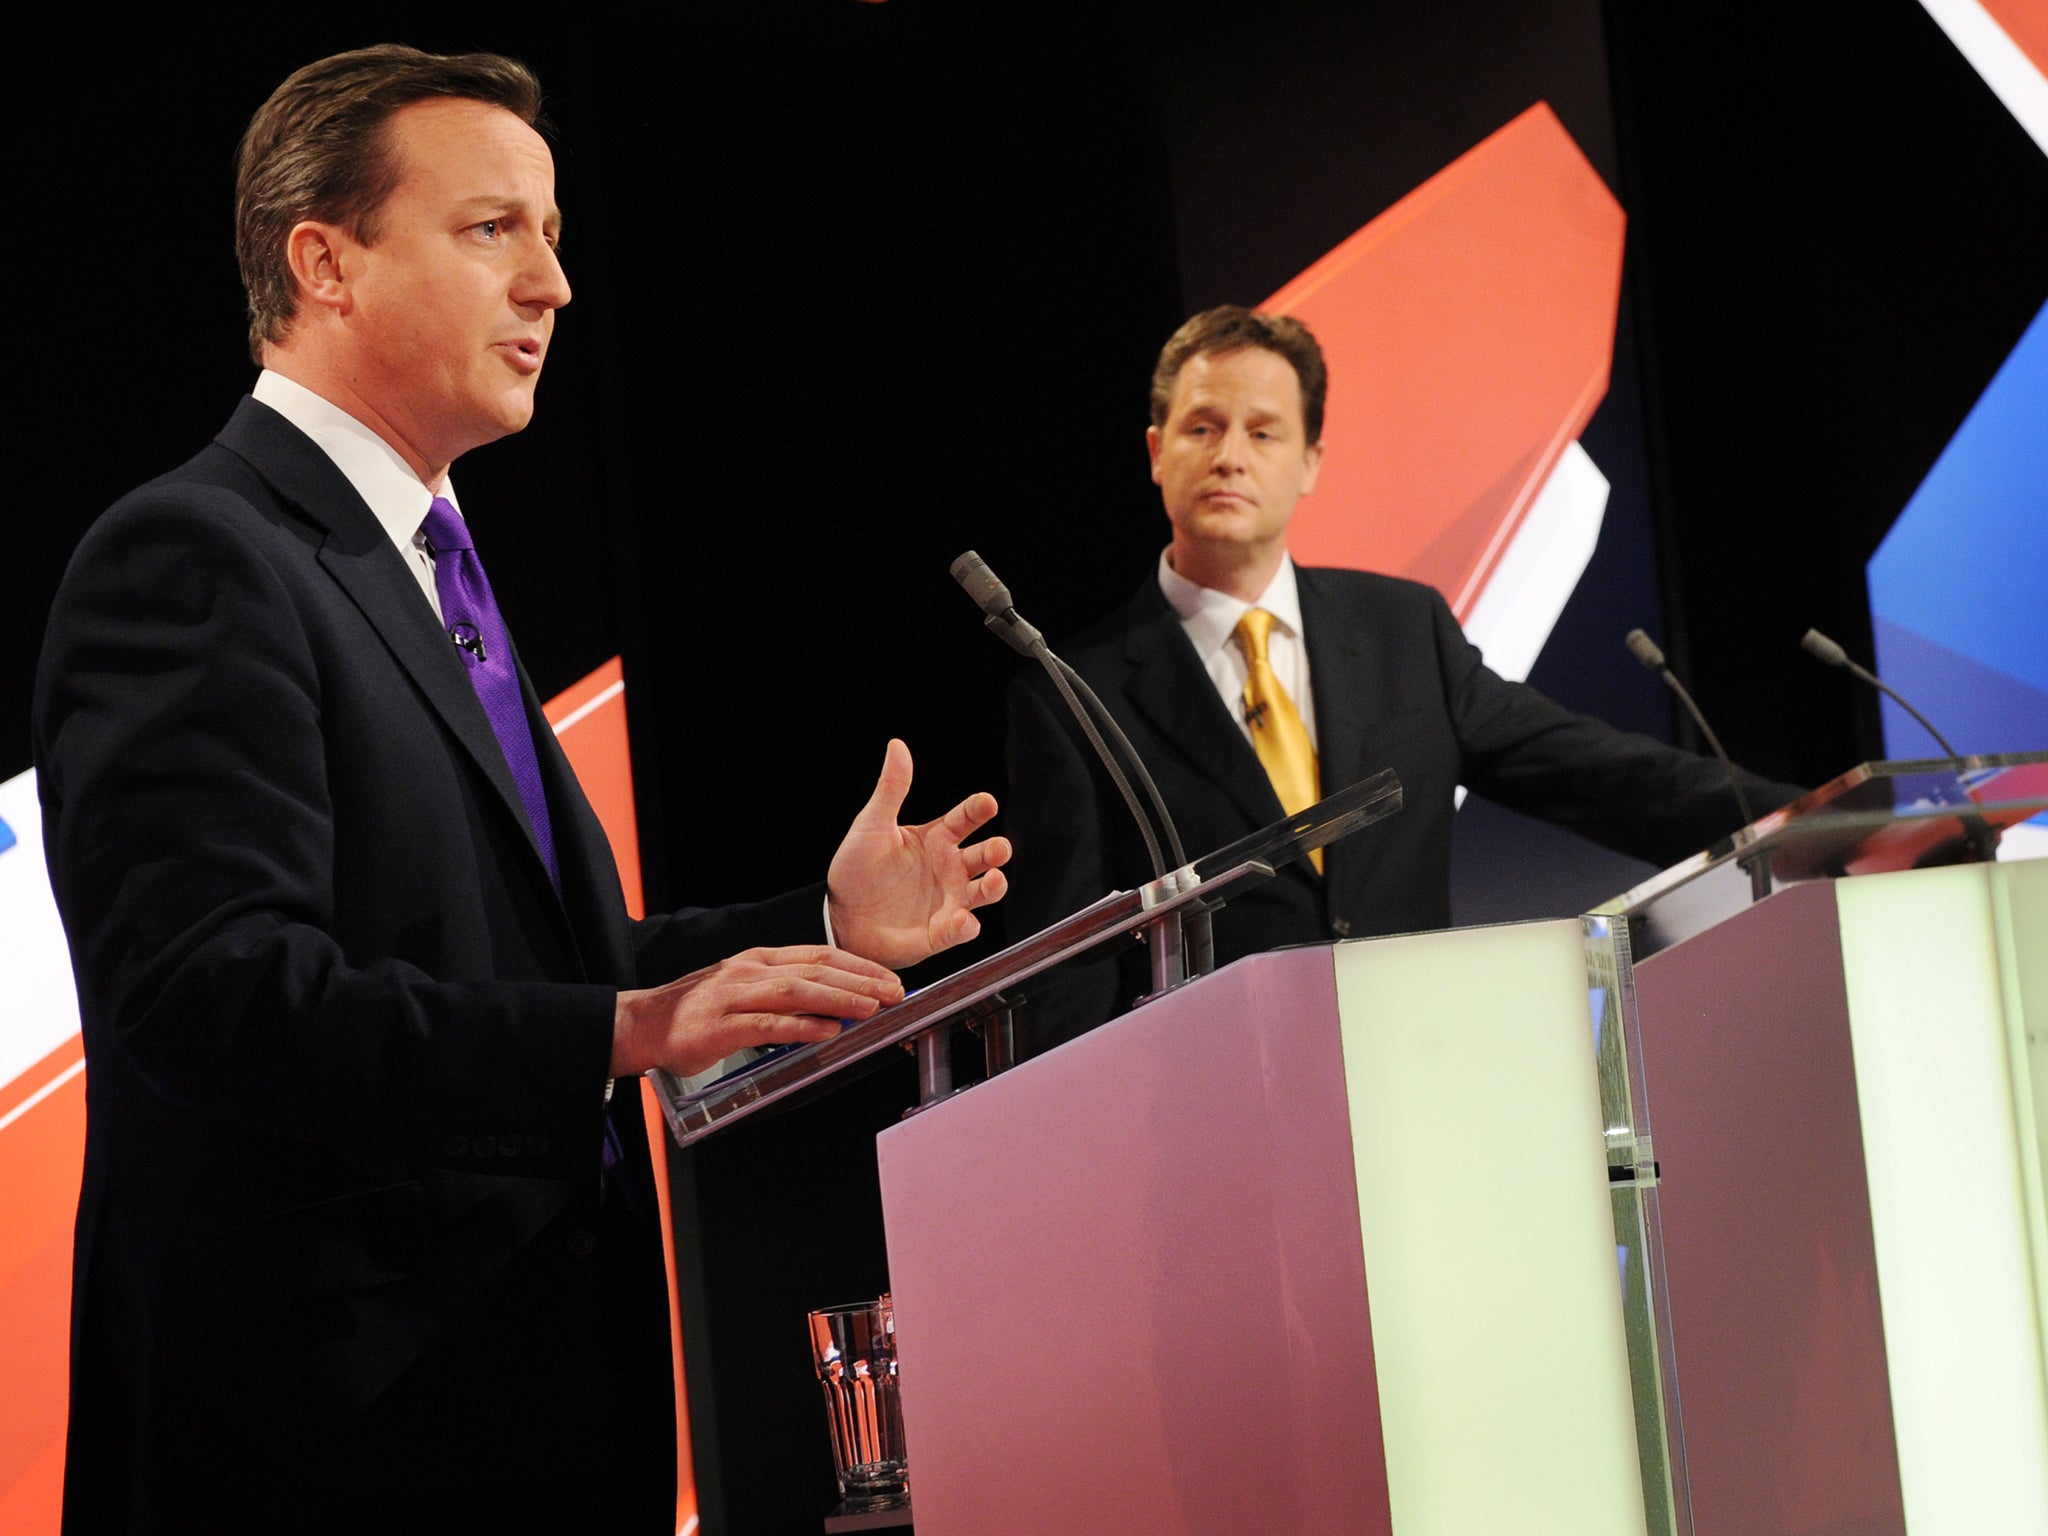 David Cameron speaks during a televised election debate in 2010